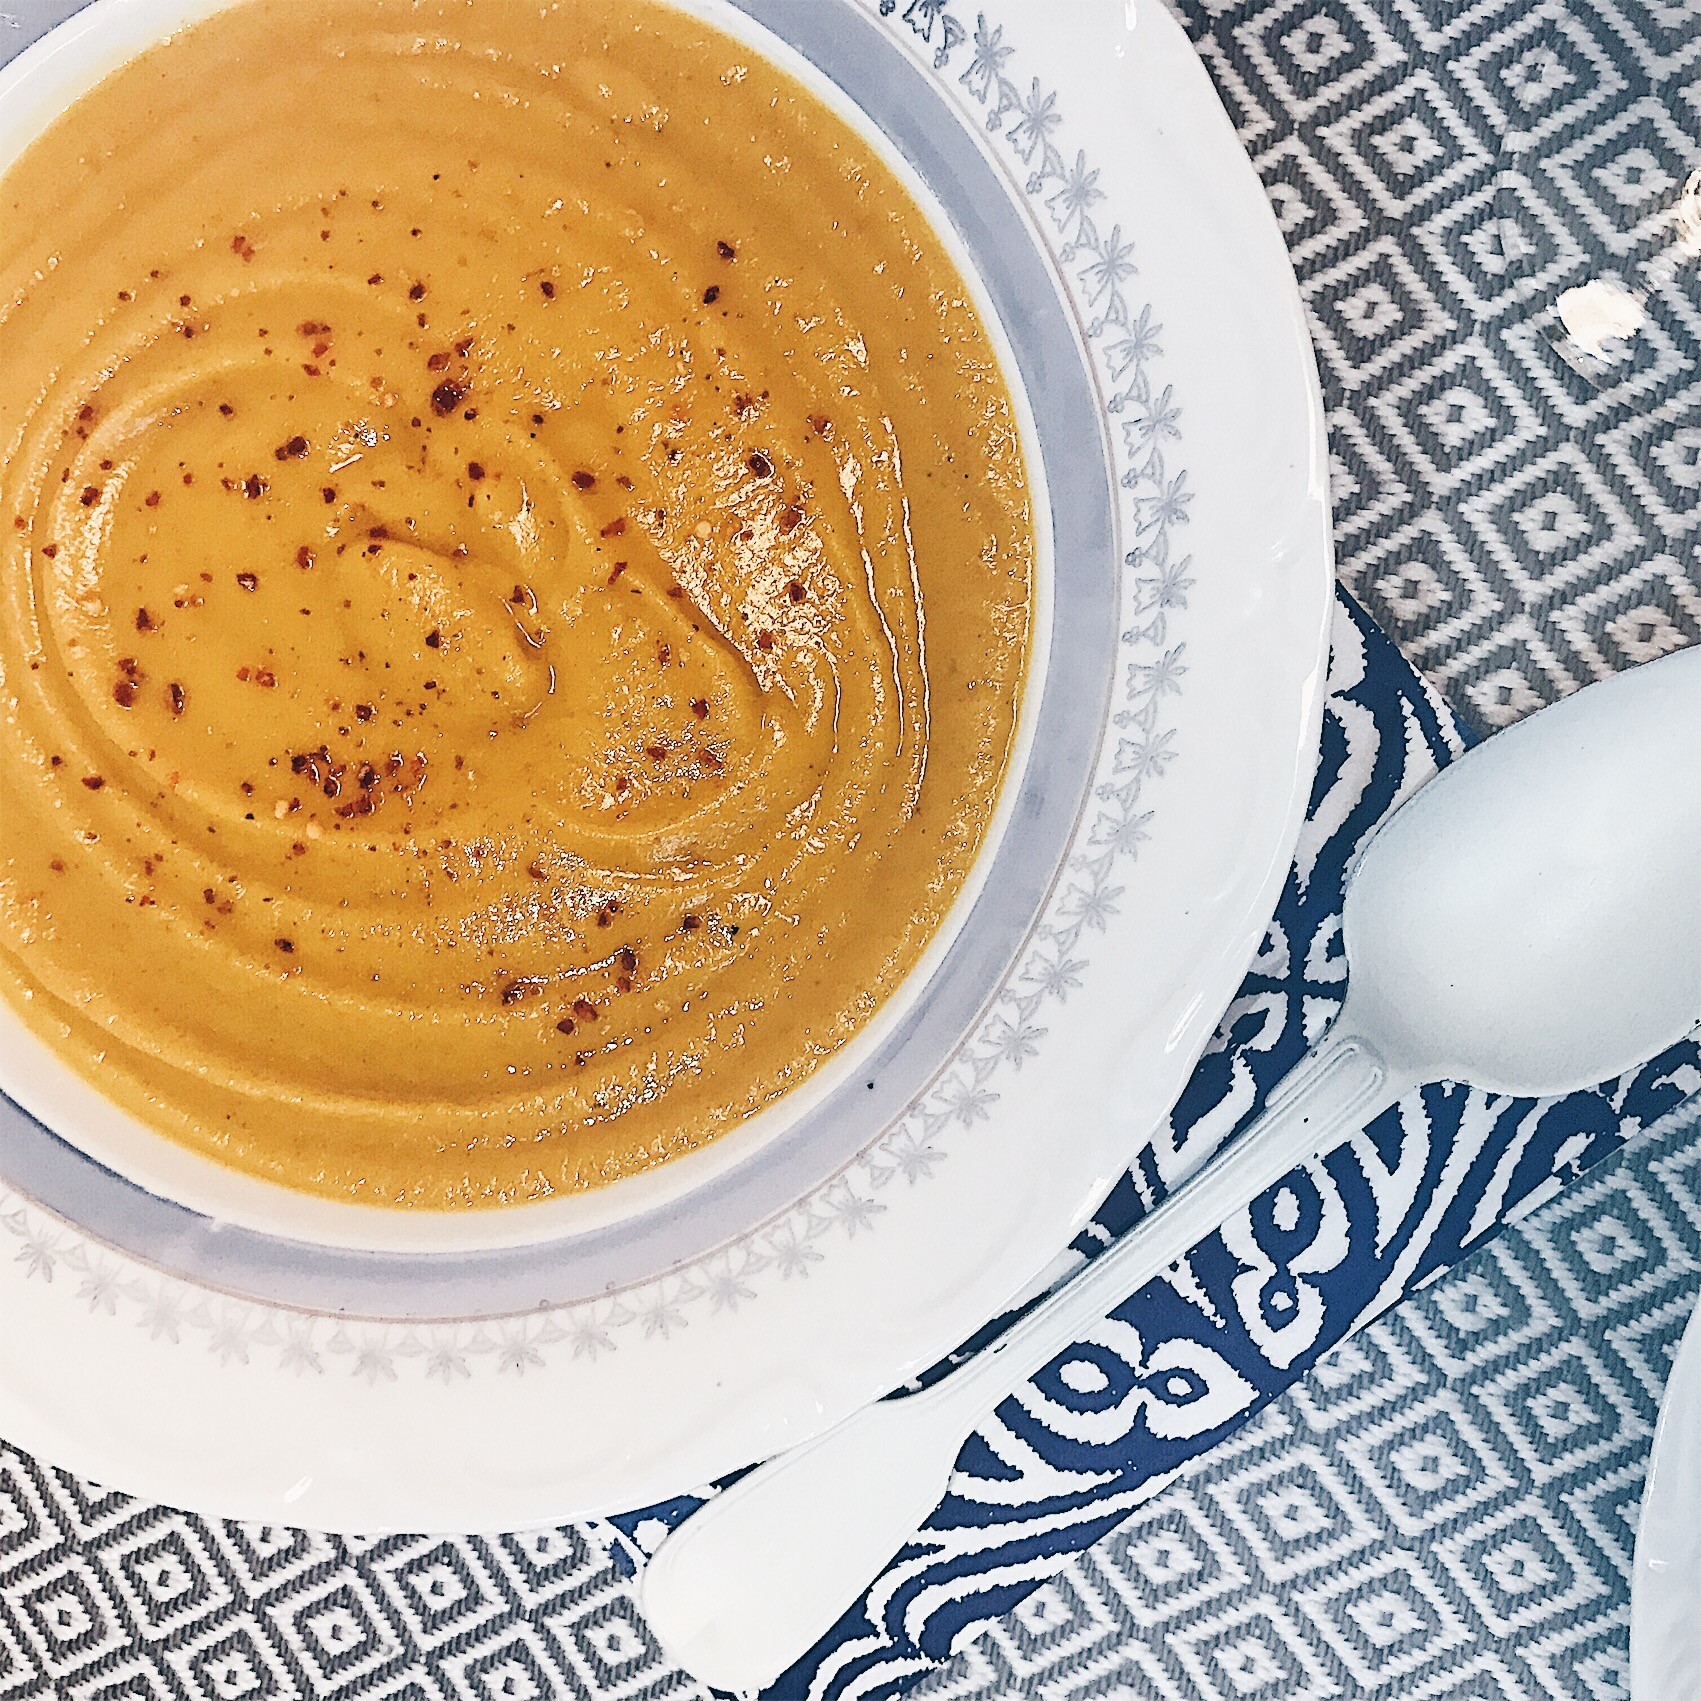 @projectfairytale: Sweet Potato and Carrot Cream Soup with Ginger